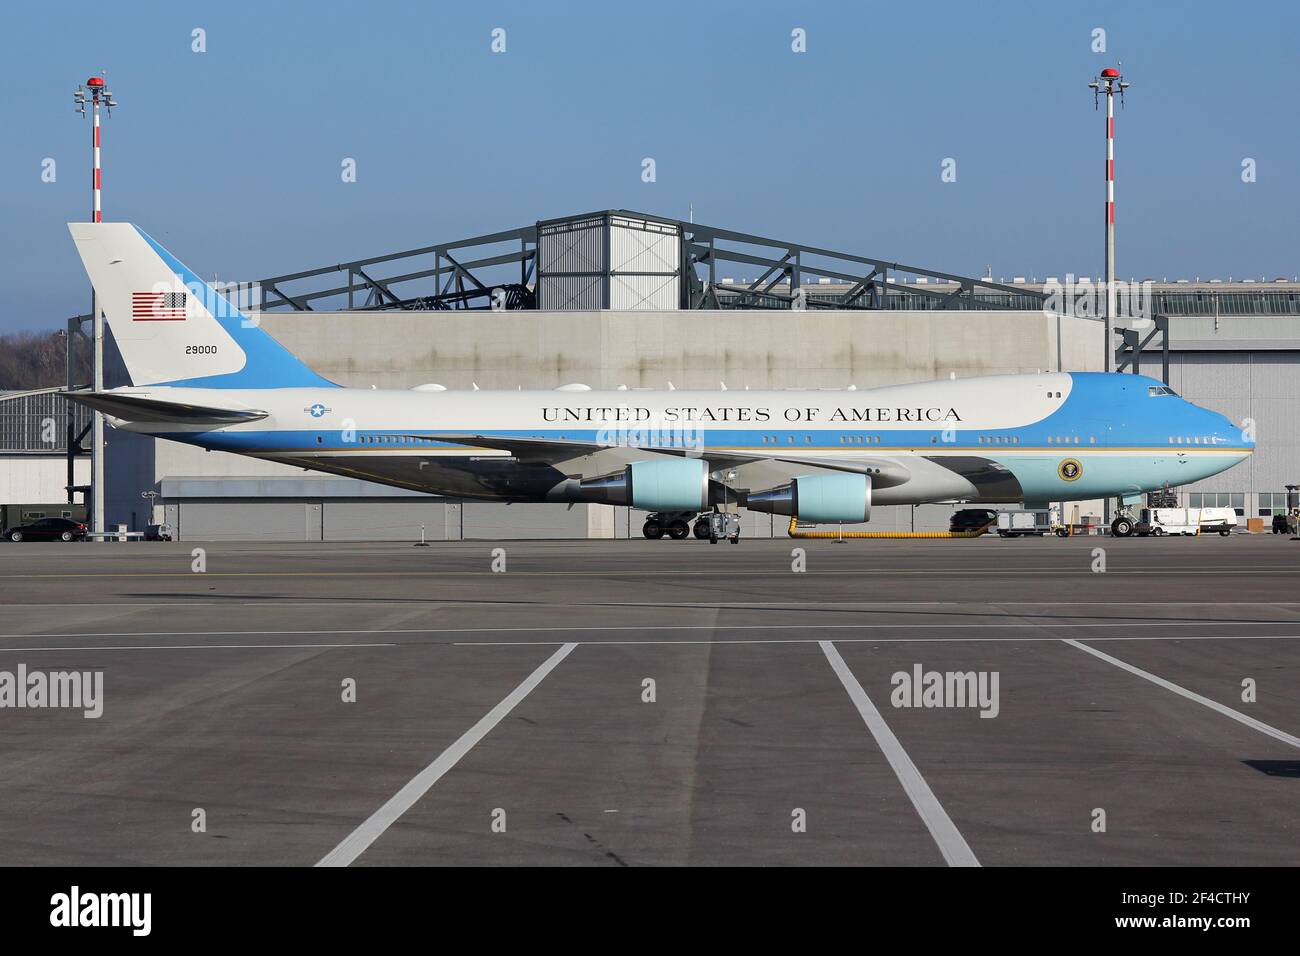 US Air Force Boeing 747/VC-25A, better known as Air Force One, that flies the President of the USA. Seen here in Zurich for the World Economic Forum Stock Photo